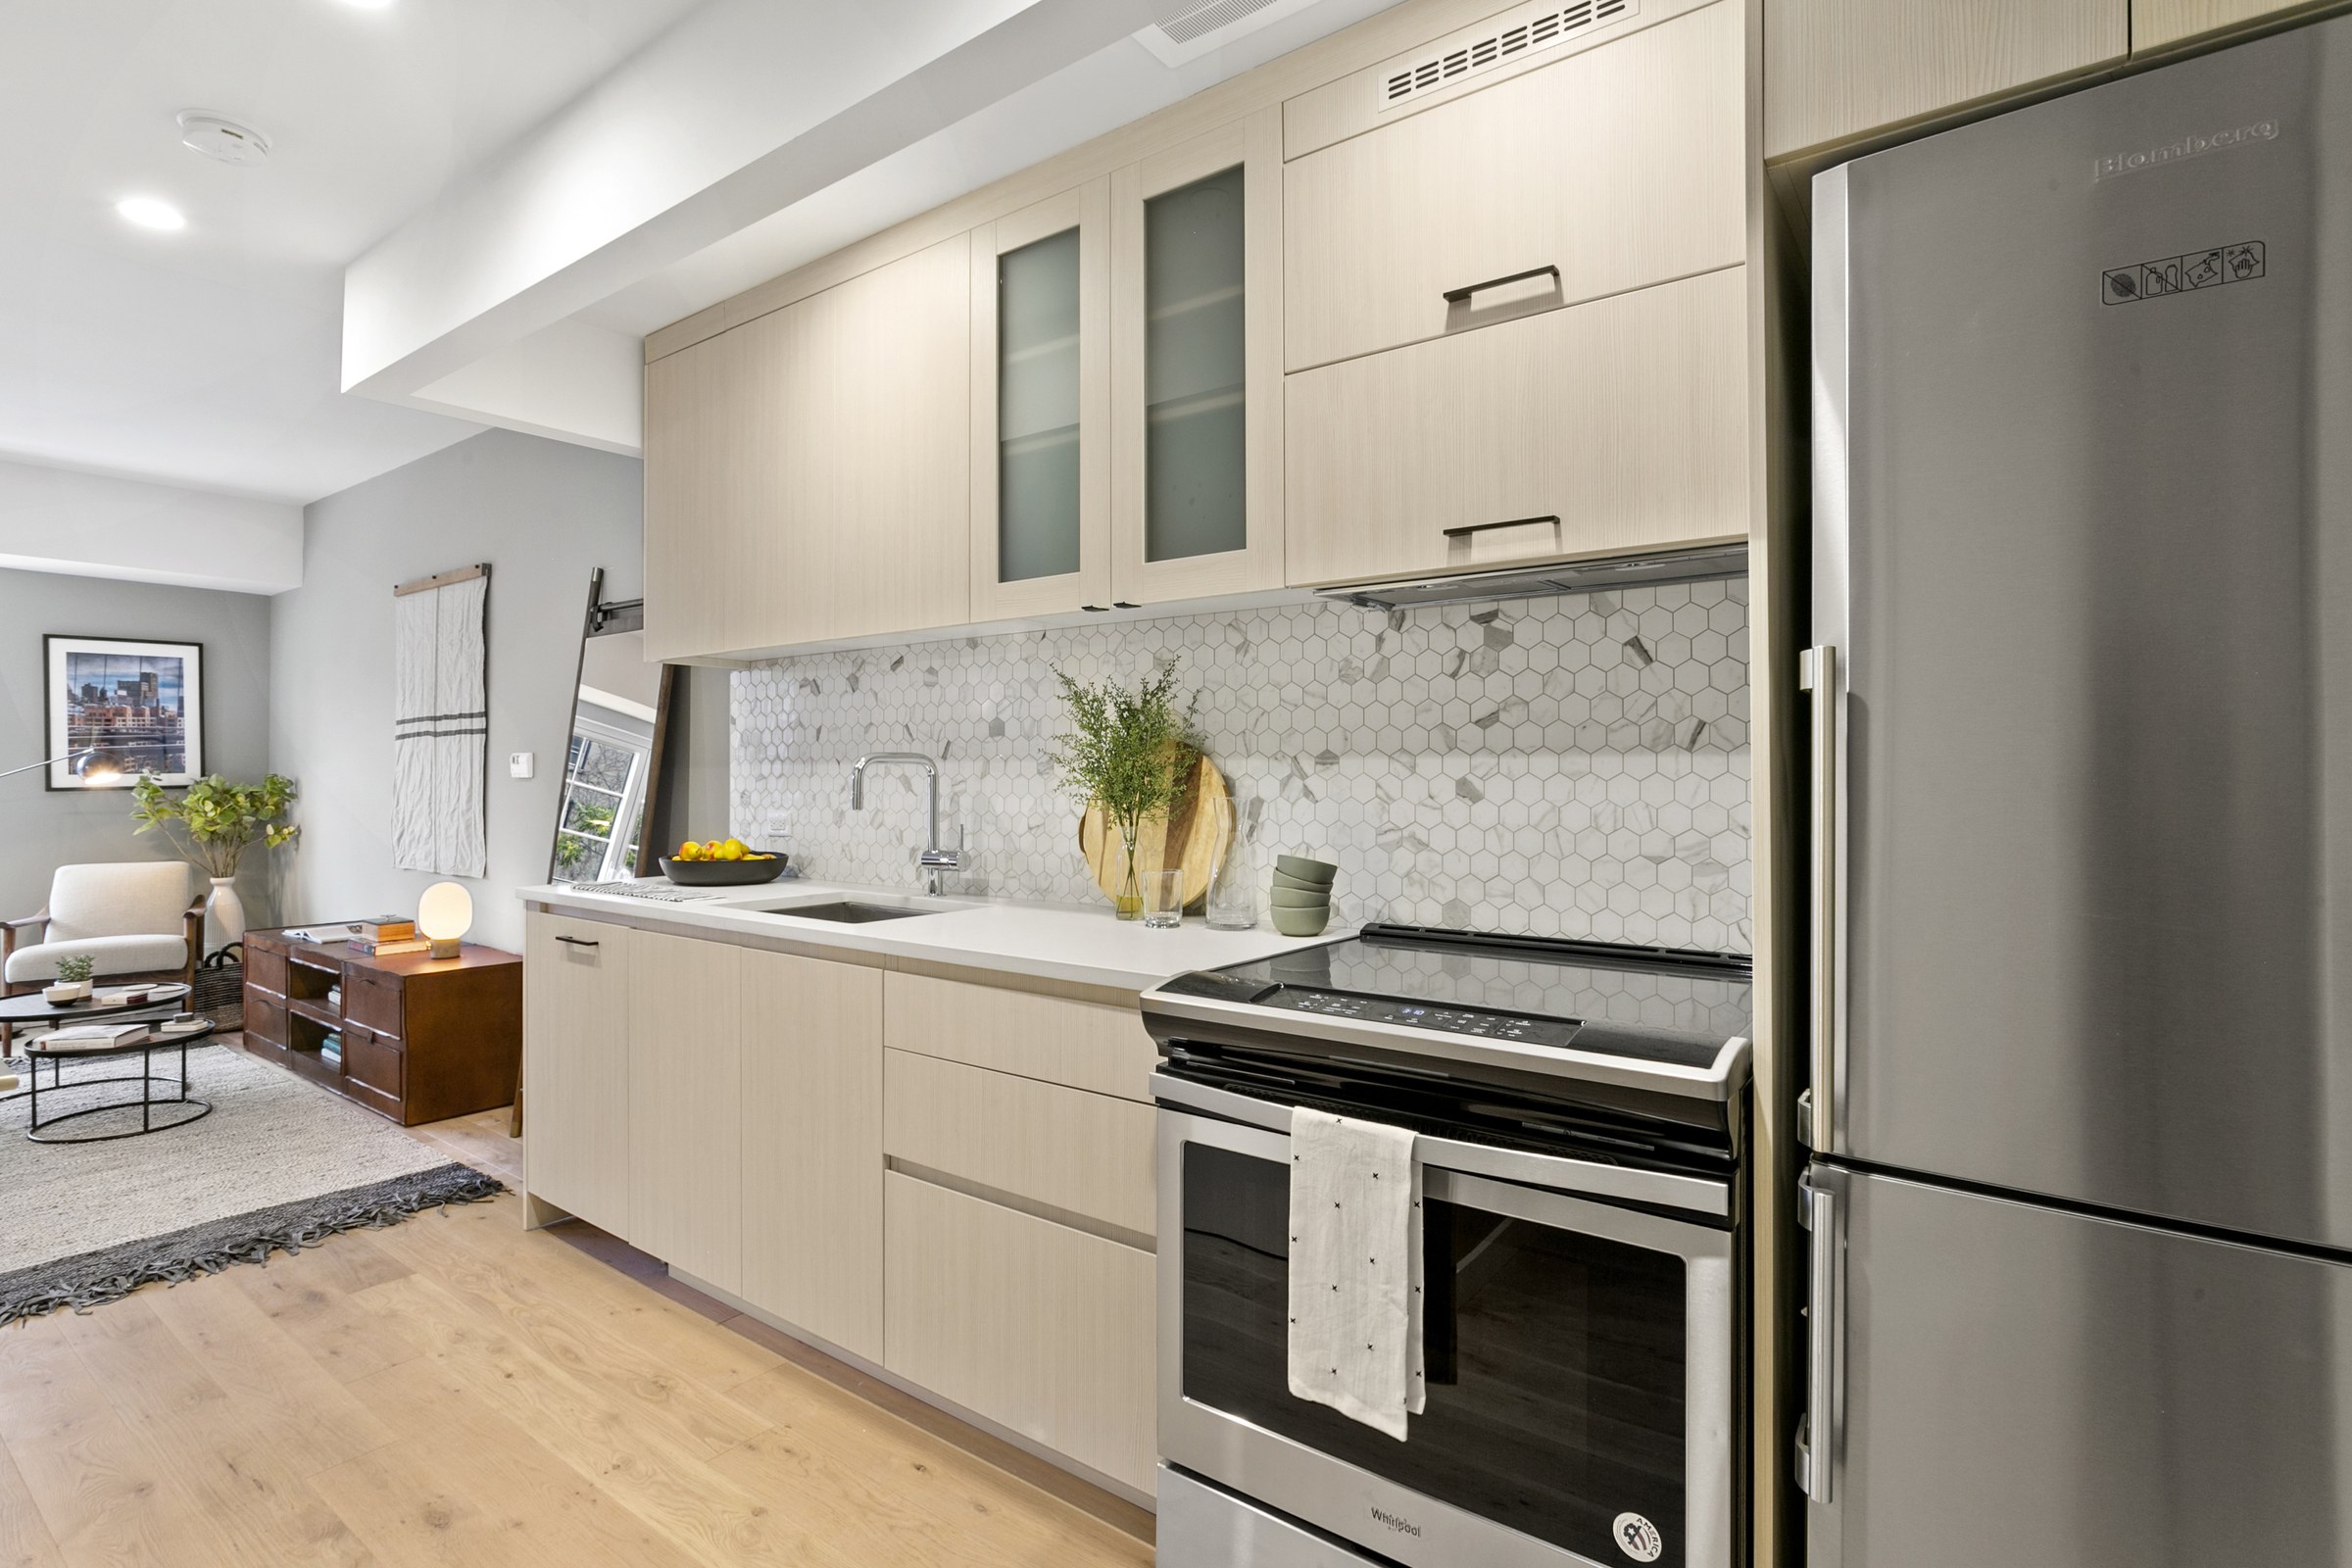 Kitchen and living space in a 555 Waverly studio unit